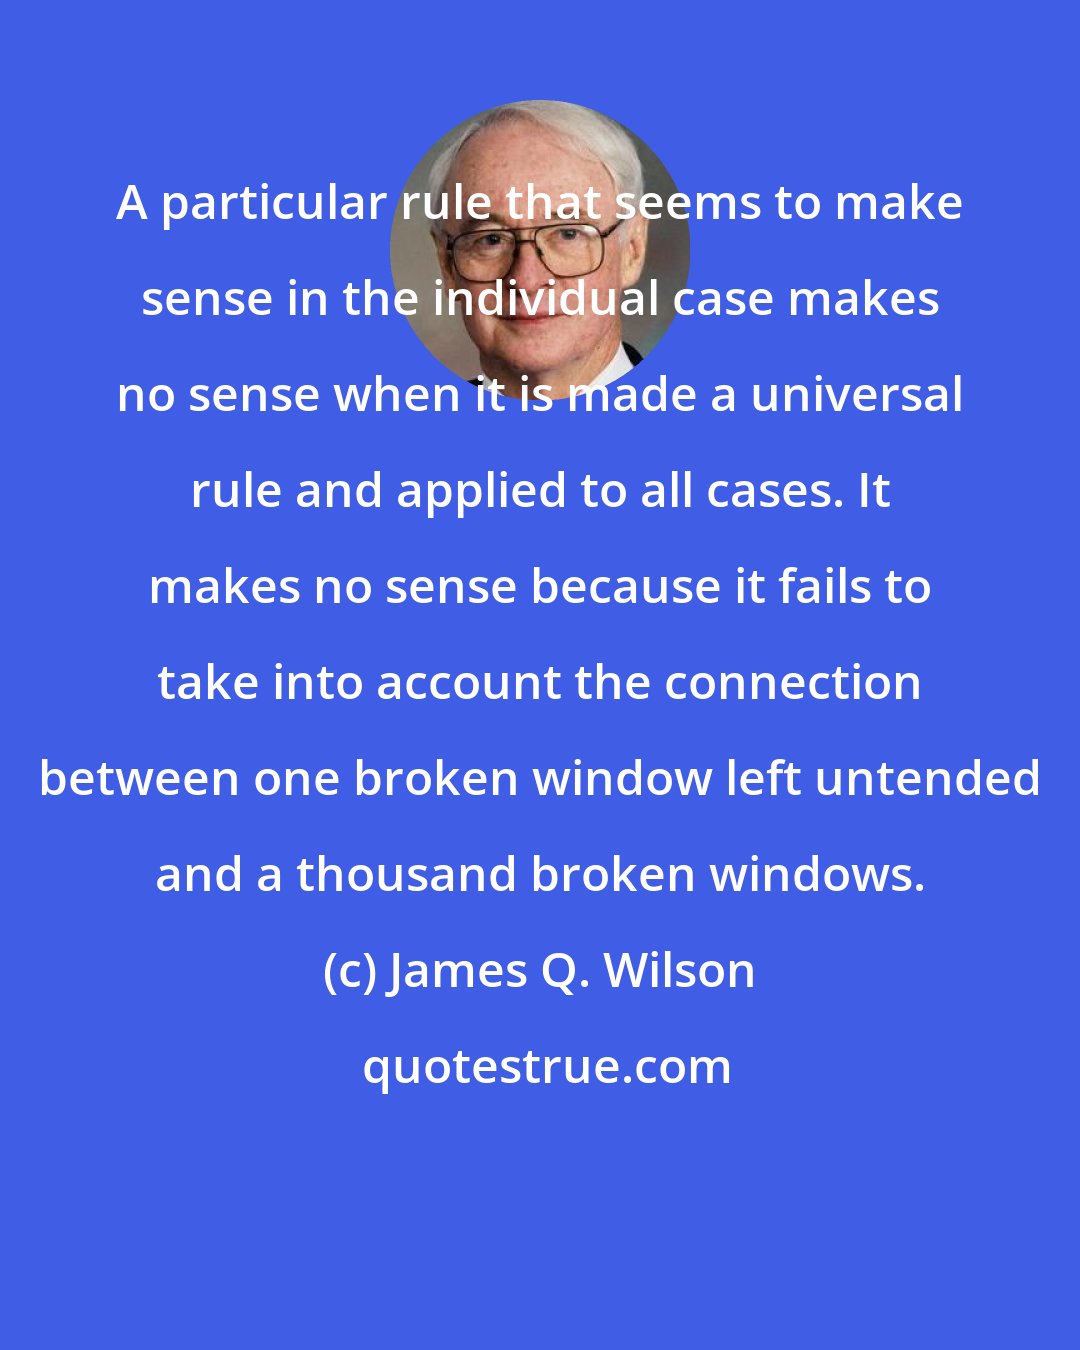 James Q. Wilson: A particular rule that seems to make sense in the individual case makes no sense when it is made a universal rule and applied to all cases. It makes no sense because it fails to take into account the connection between one broken window left untended and a thousand broken windows.